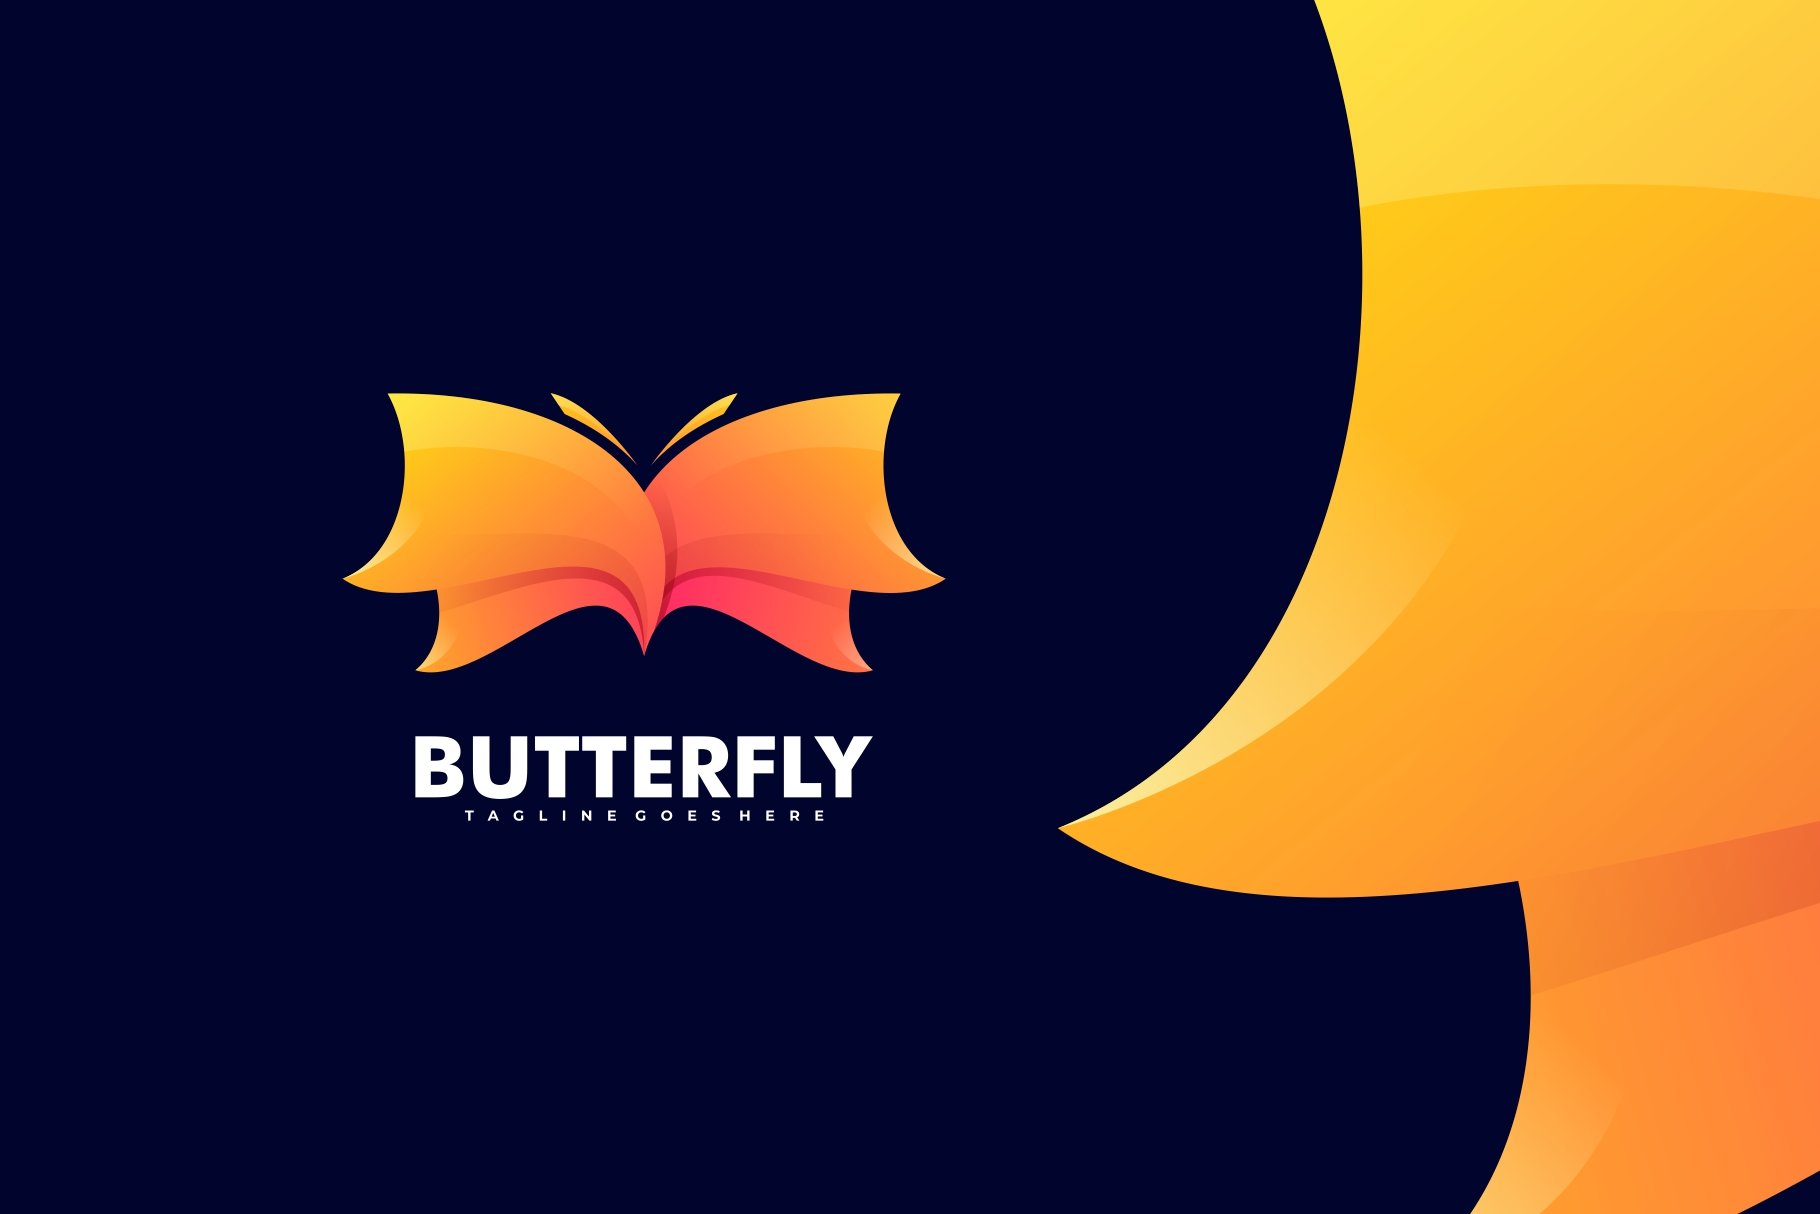 Butterfly Gradient Logo cover image.